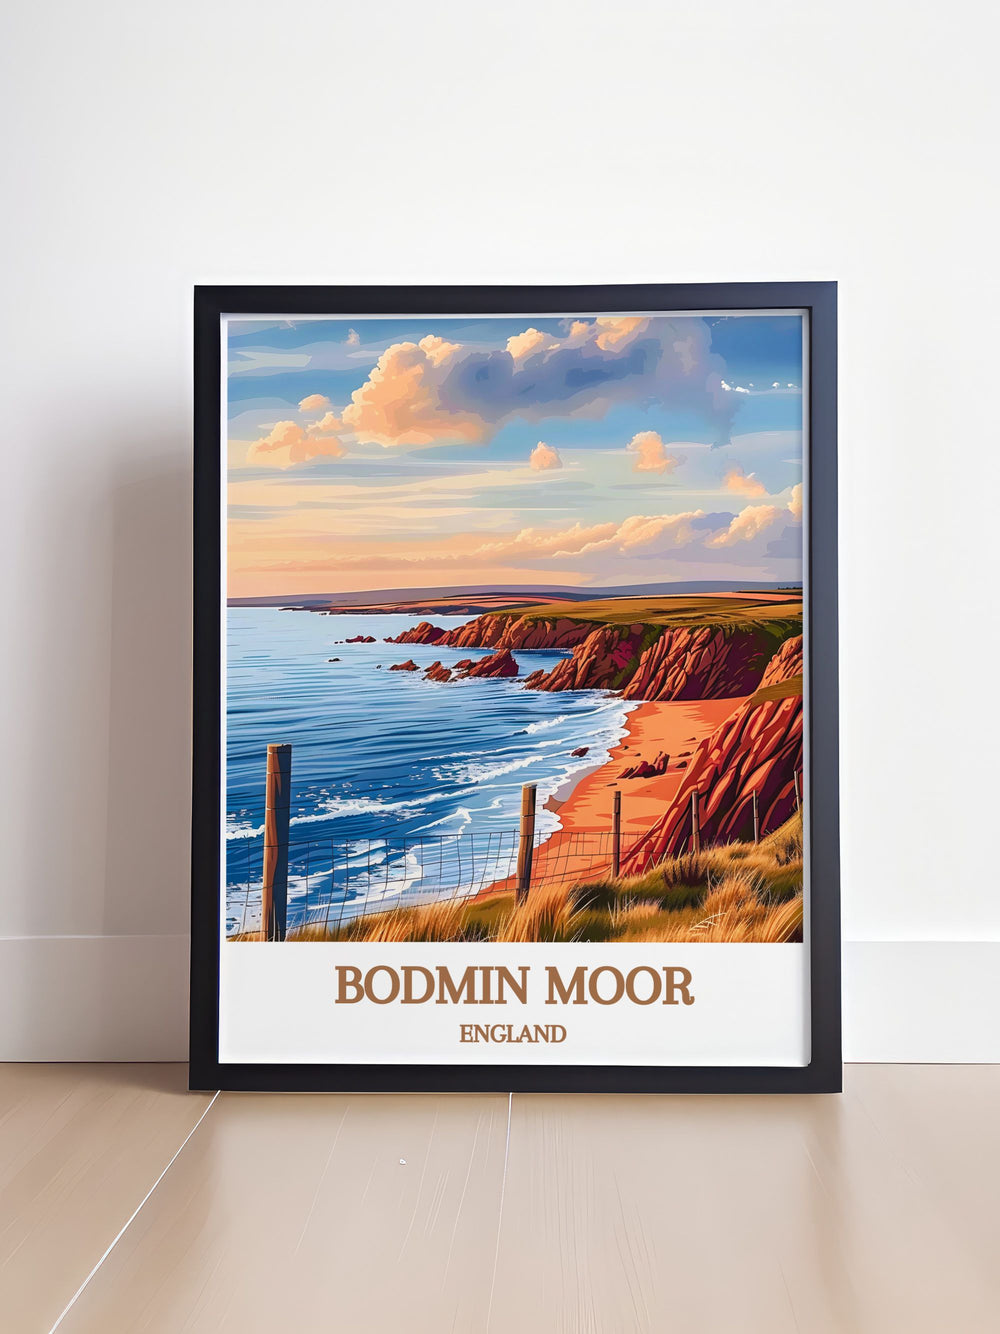 Gallery wall art featuring the expansive landscapes of Bodmin Moor, with rolling hills, ancient stone circles, and windswept tors, showcasing the timeless beauty of the English countryside in rich colors and intricate details.